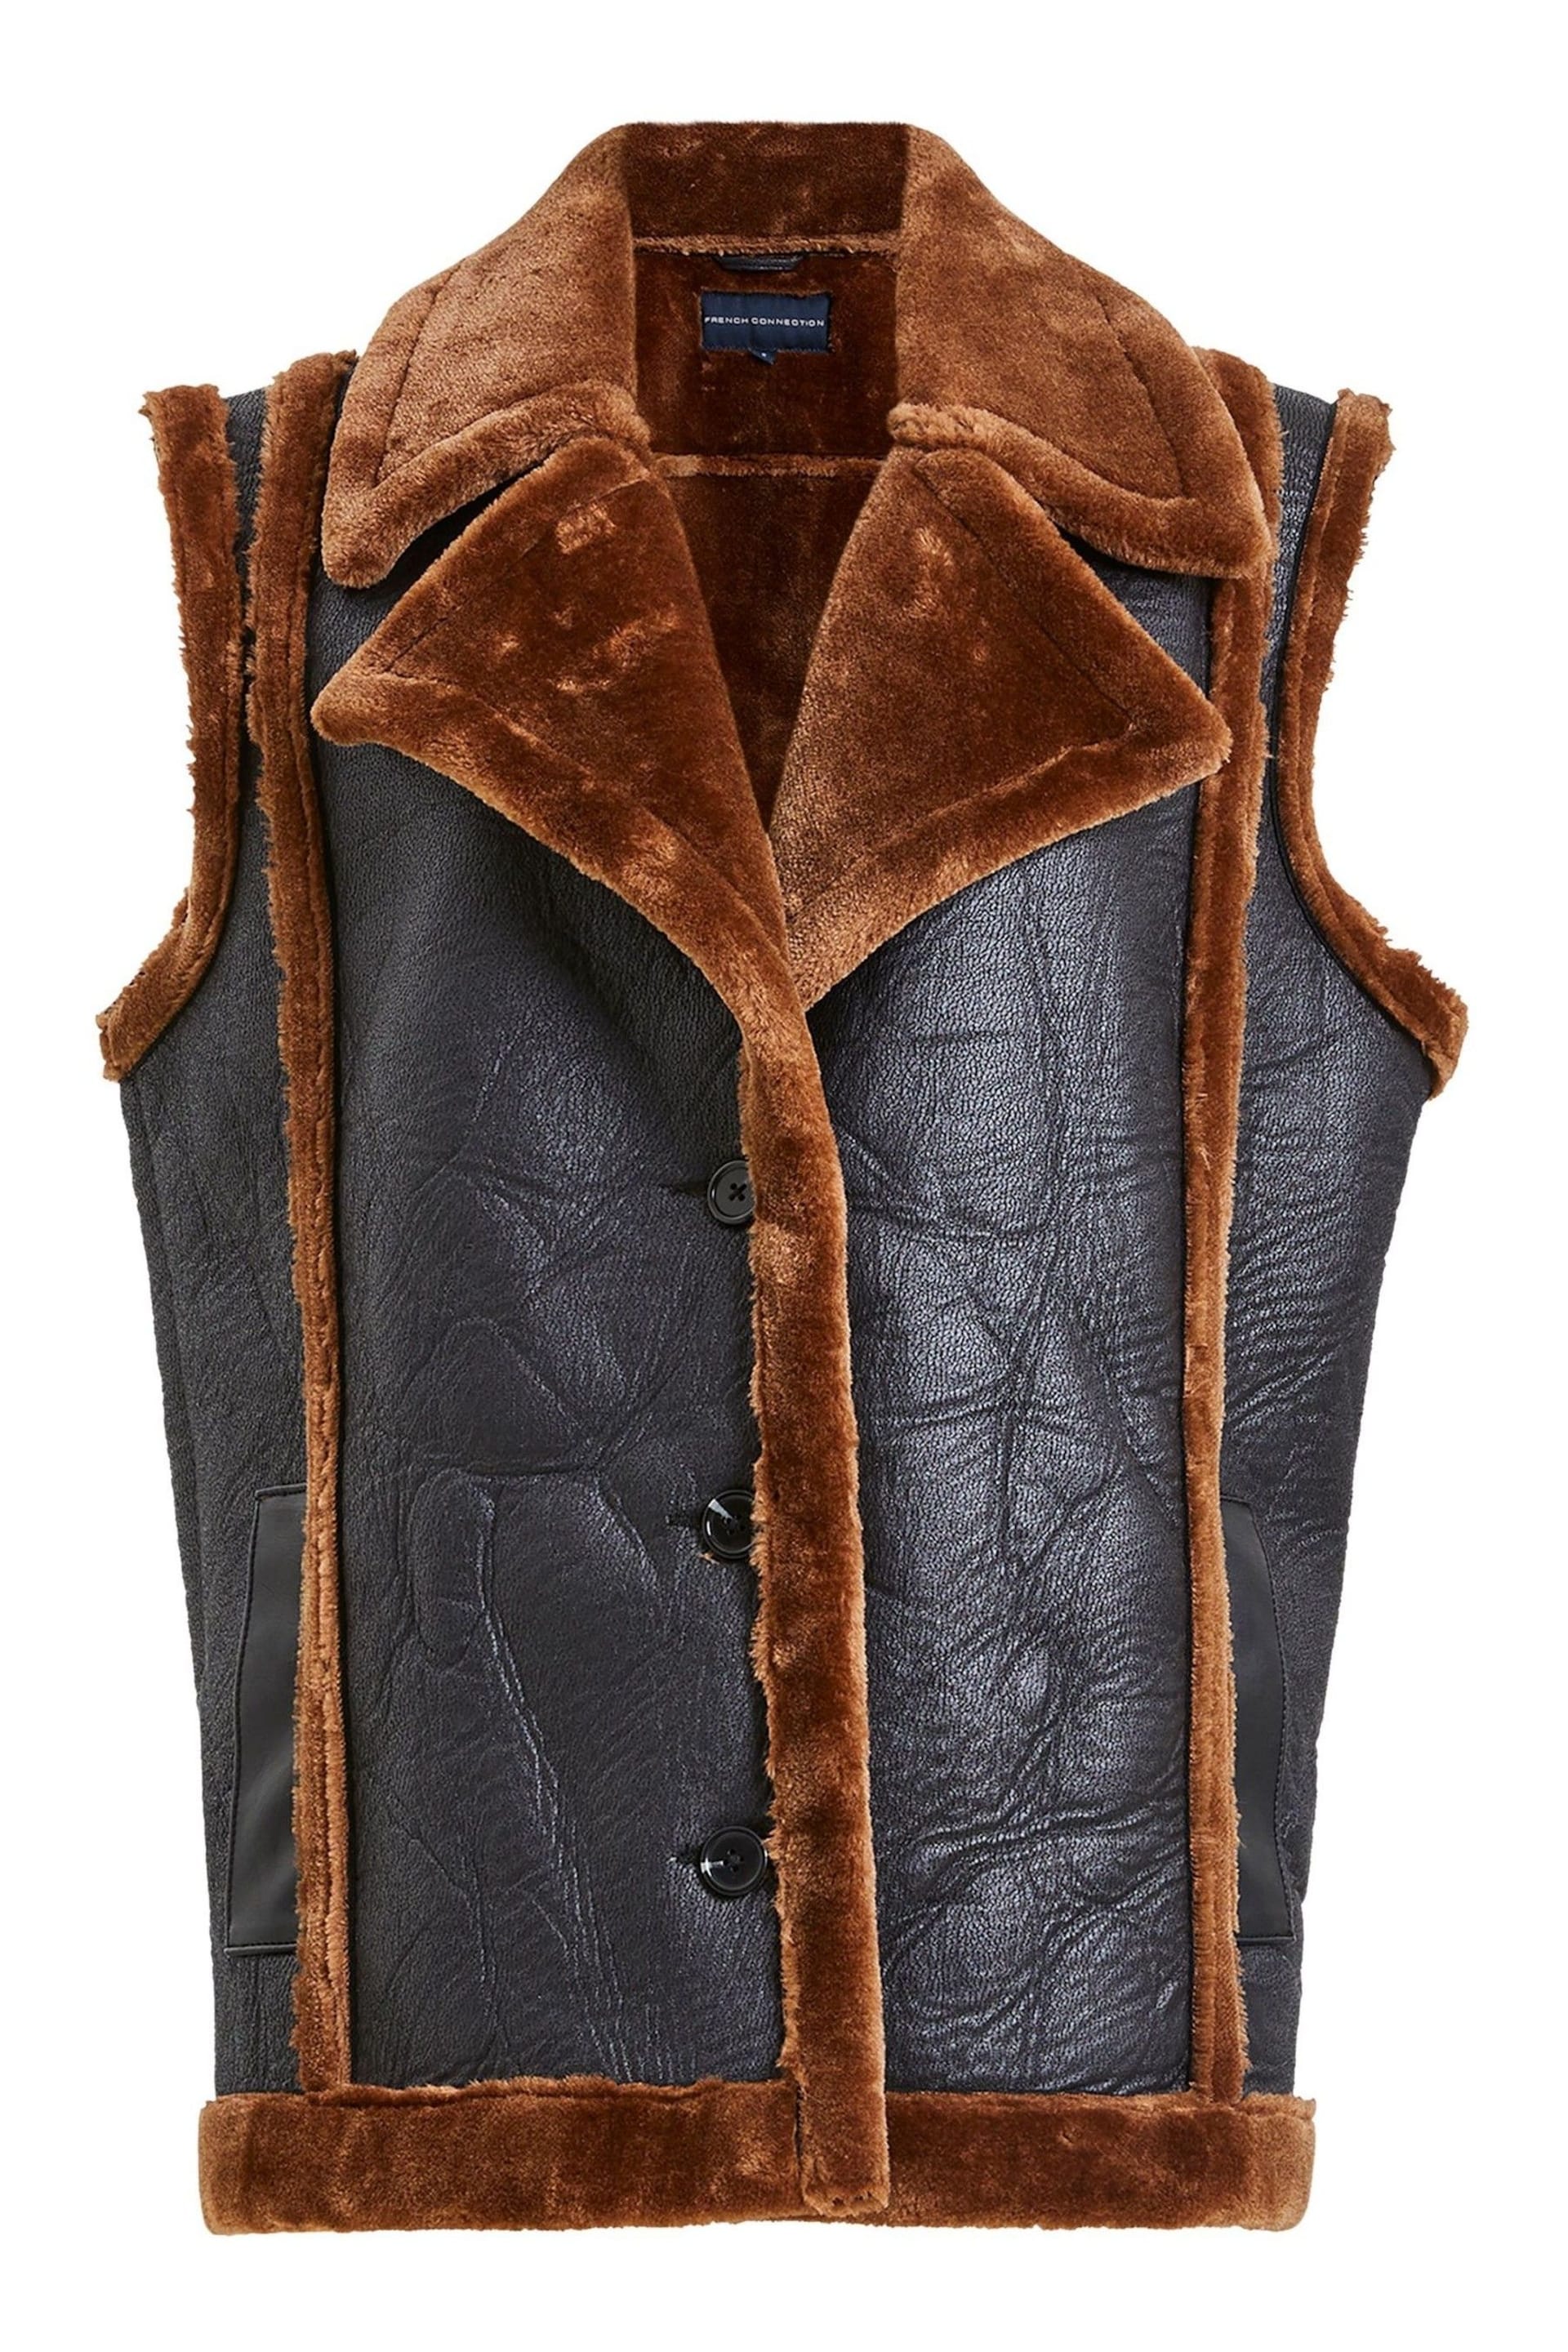 French Connection Belen Faux Fur Gilet - Image 4 of 4